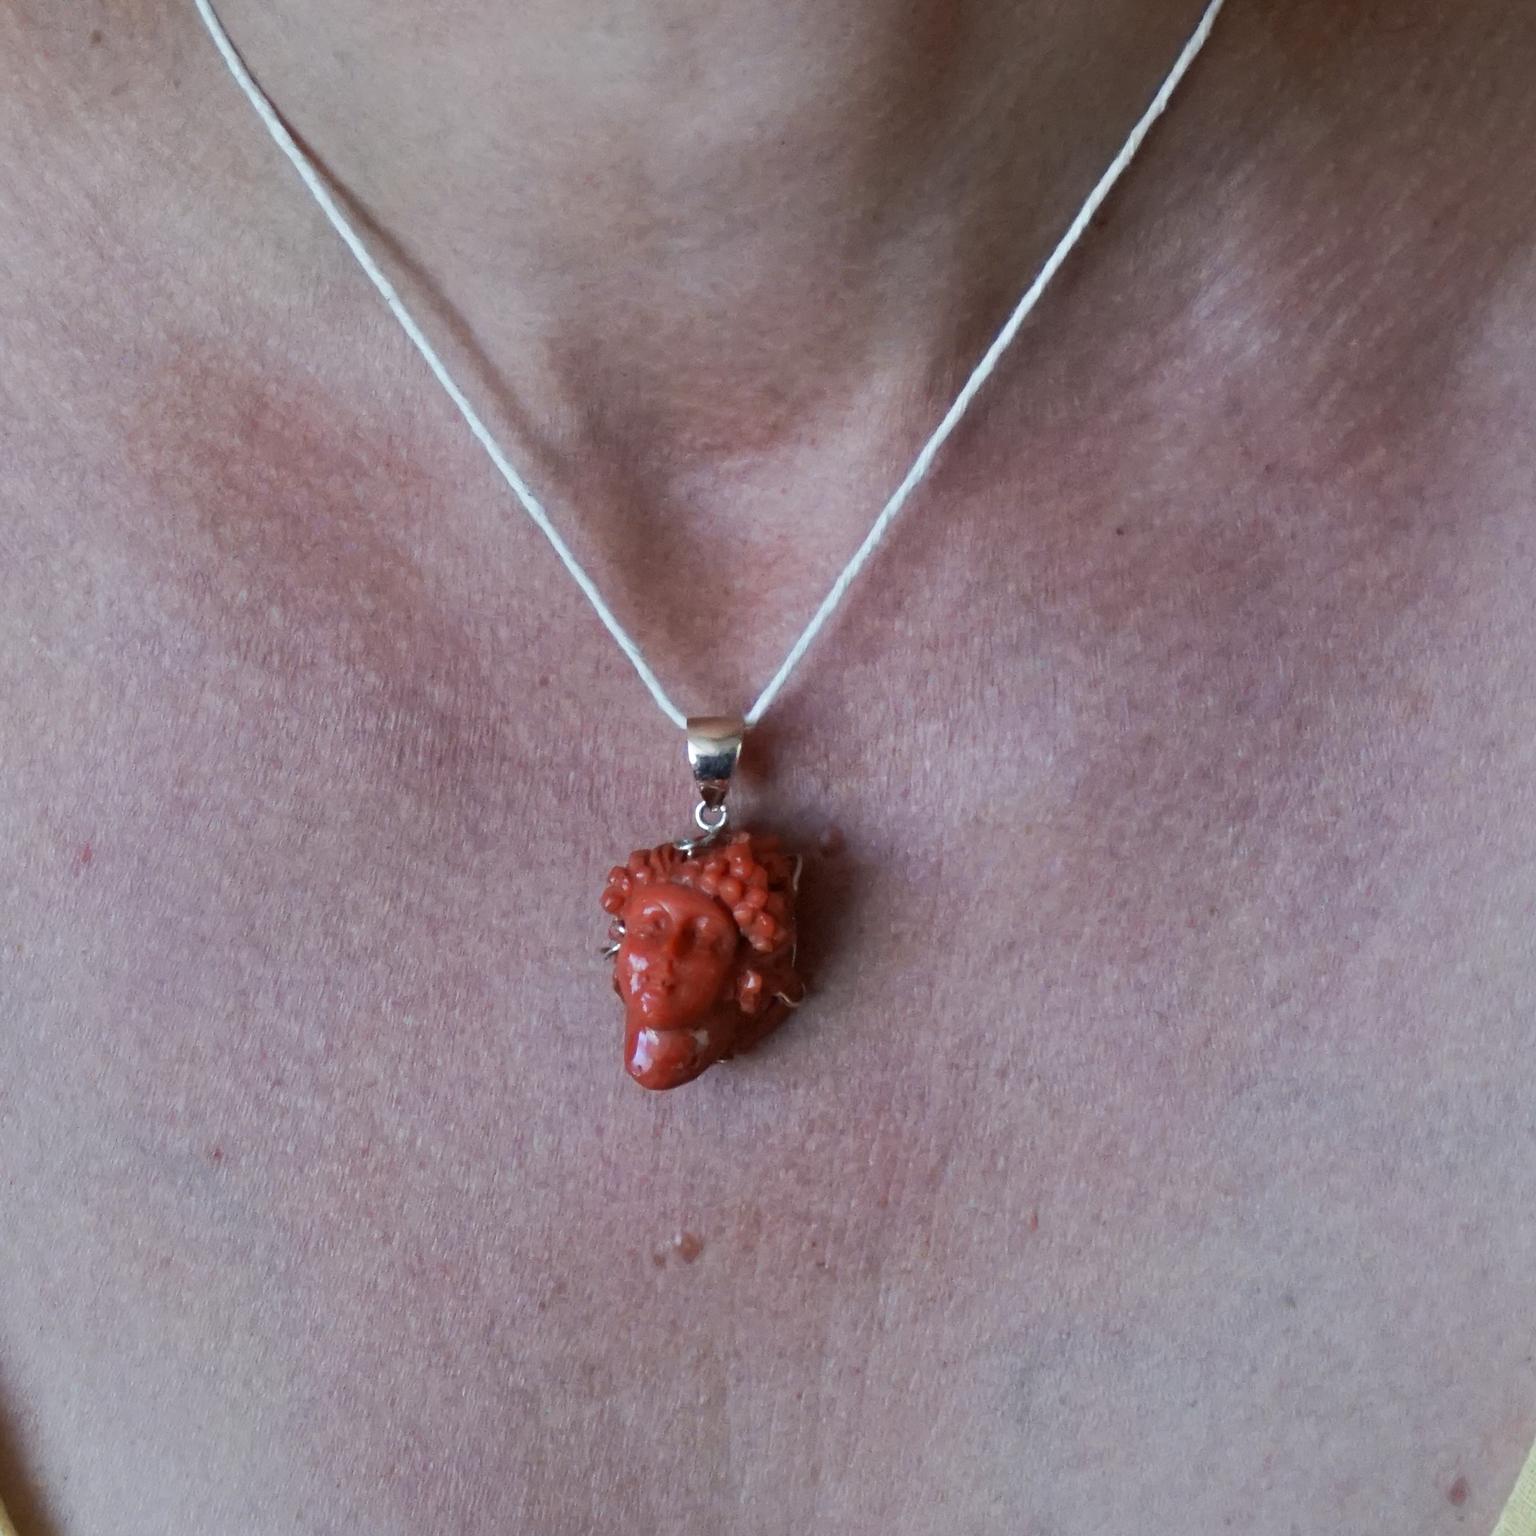 19th Century Italian hand carved coral and gold Bacchante / Bacchus pendant.
Made from 9 Kt gold and natural, untreated hand carved blood coral from Sicily.

Weighs approx. 13.4 g, of which approx. 3.5 g are of 9 kt gold.

Finely engraved by